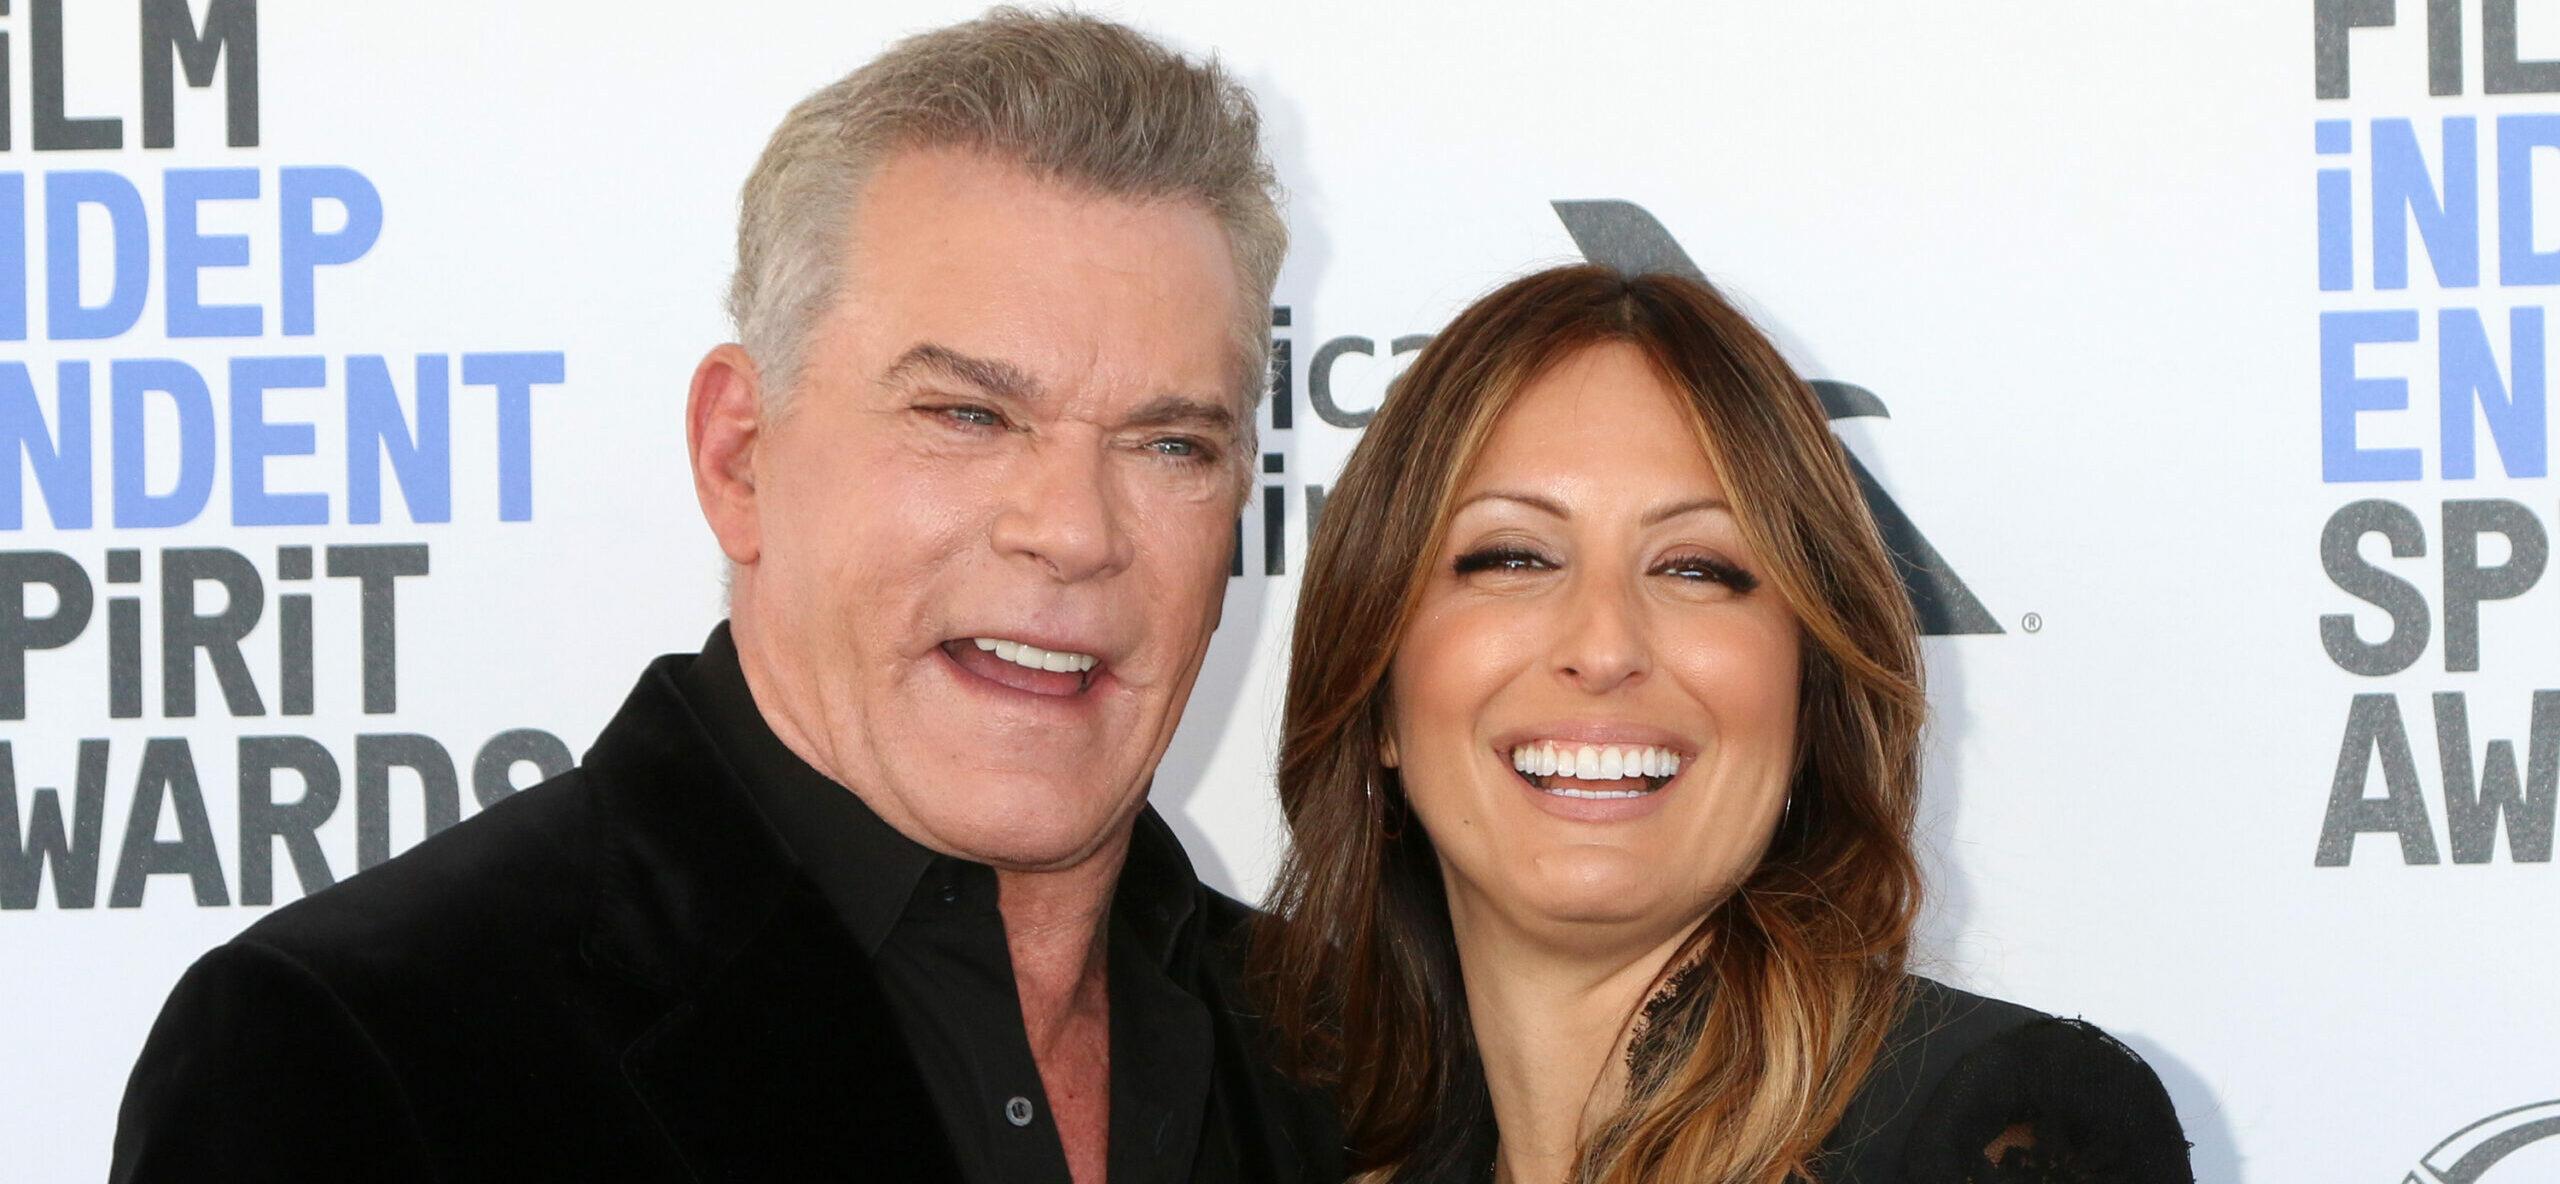 Ray Liotta and Jacy Nittolo at 2020 Film Independent Spirit Awards - Santa Monica